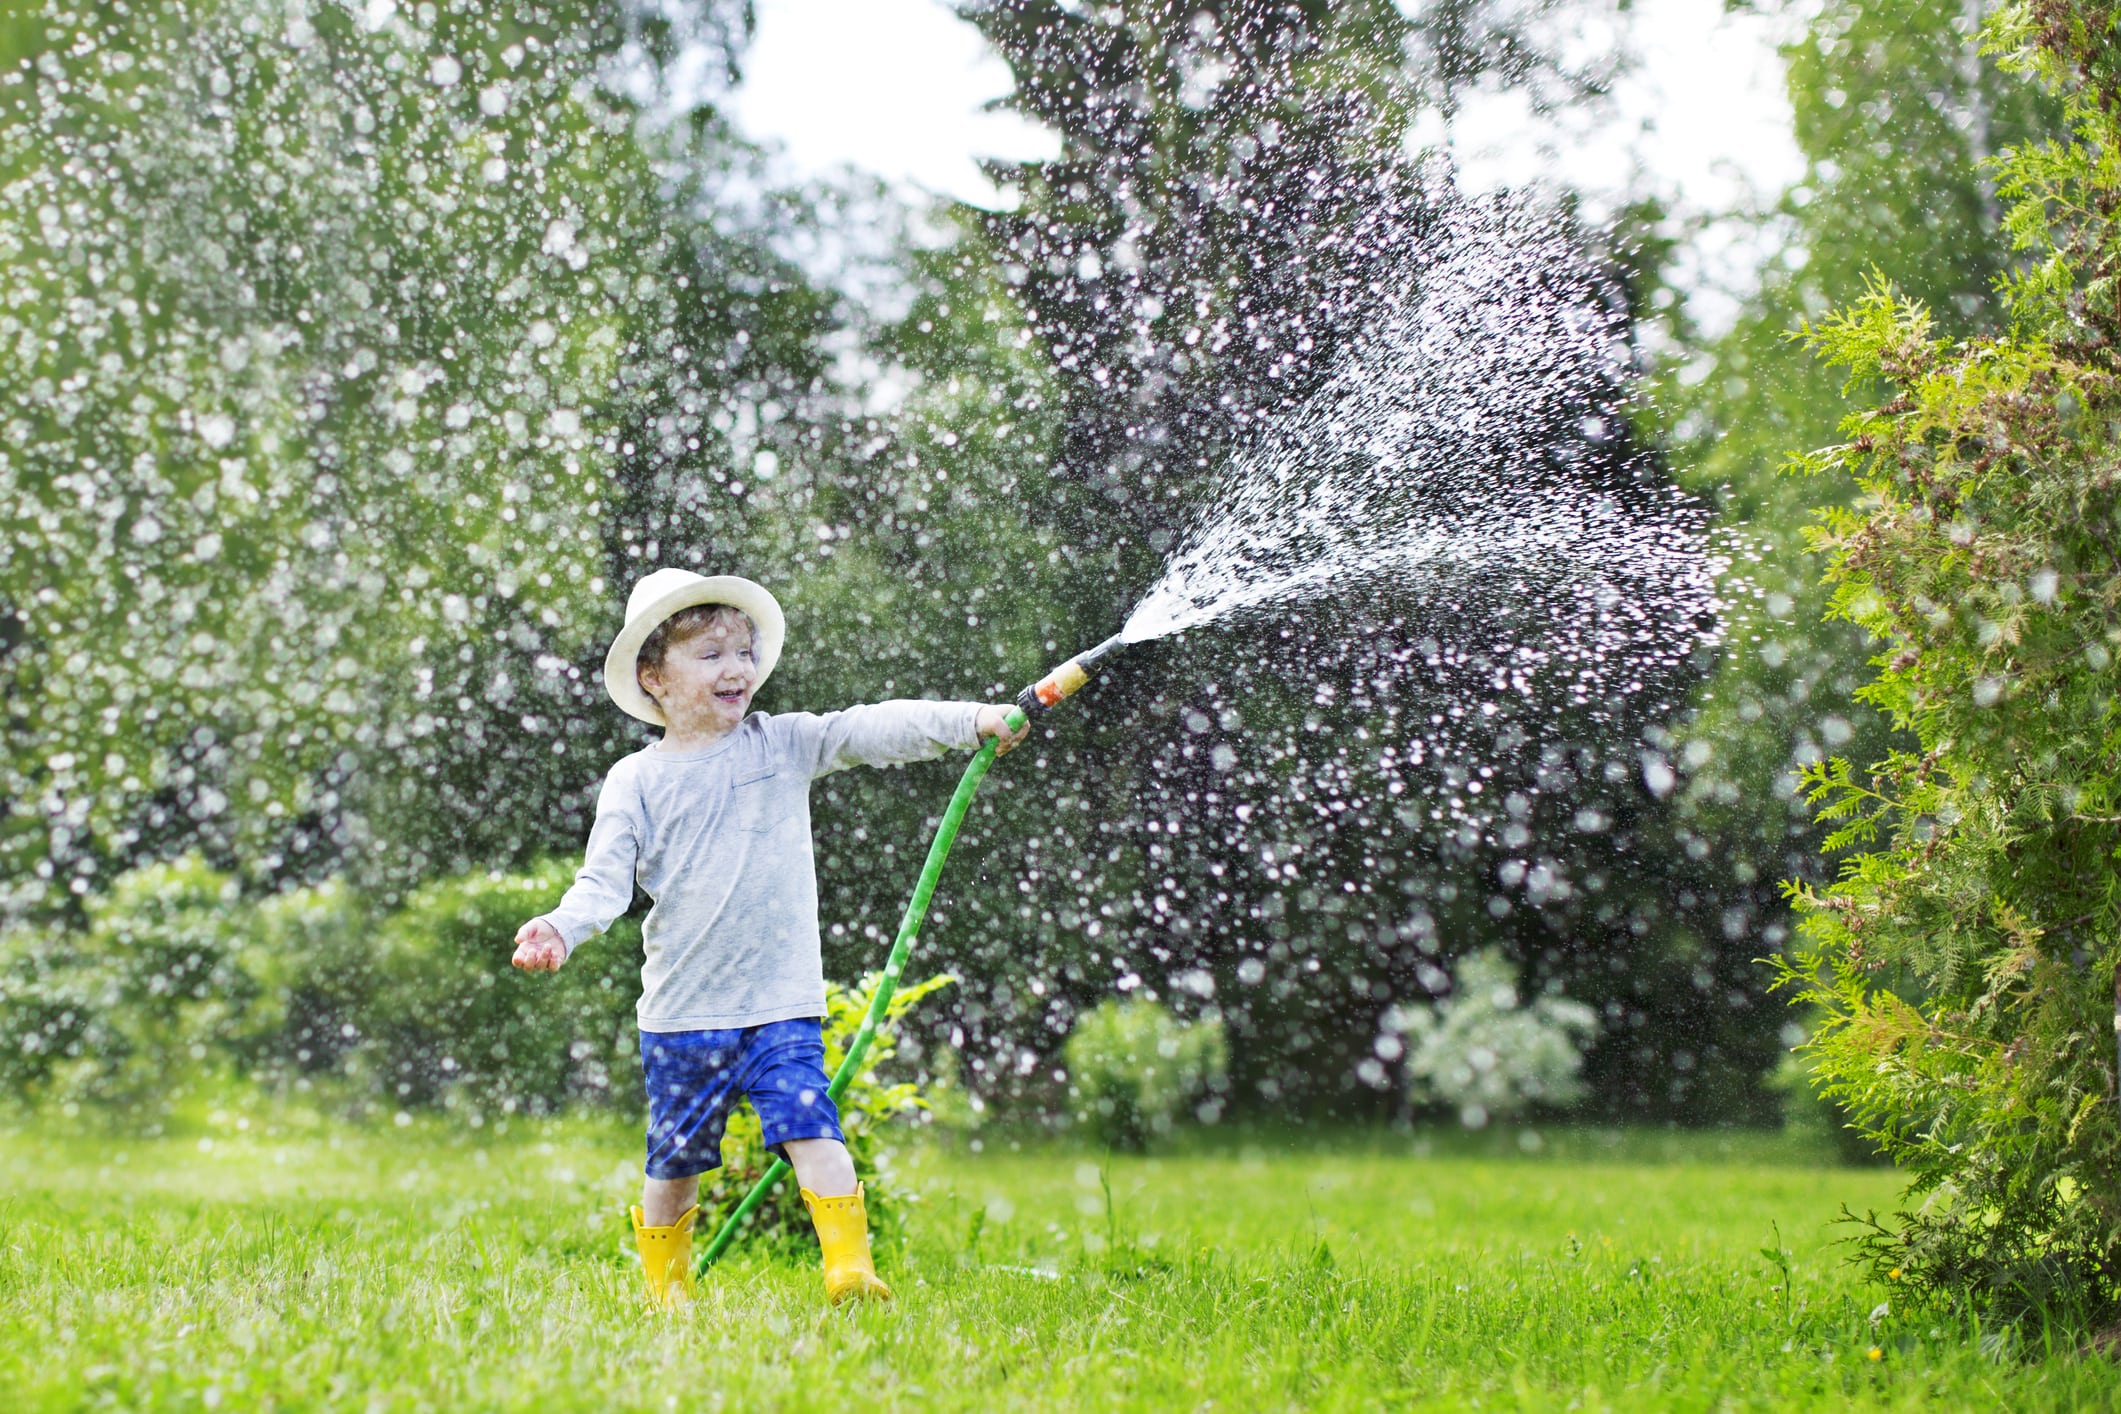 A boy holding a hose and showering the plants